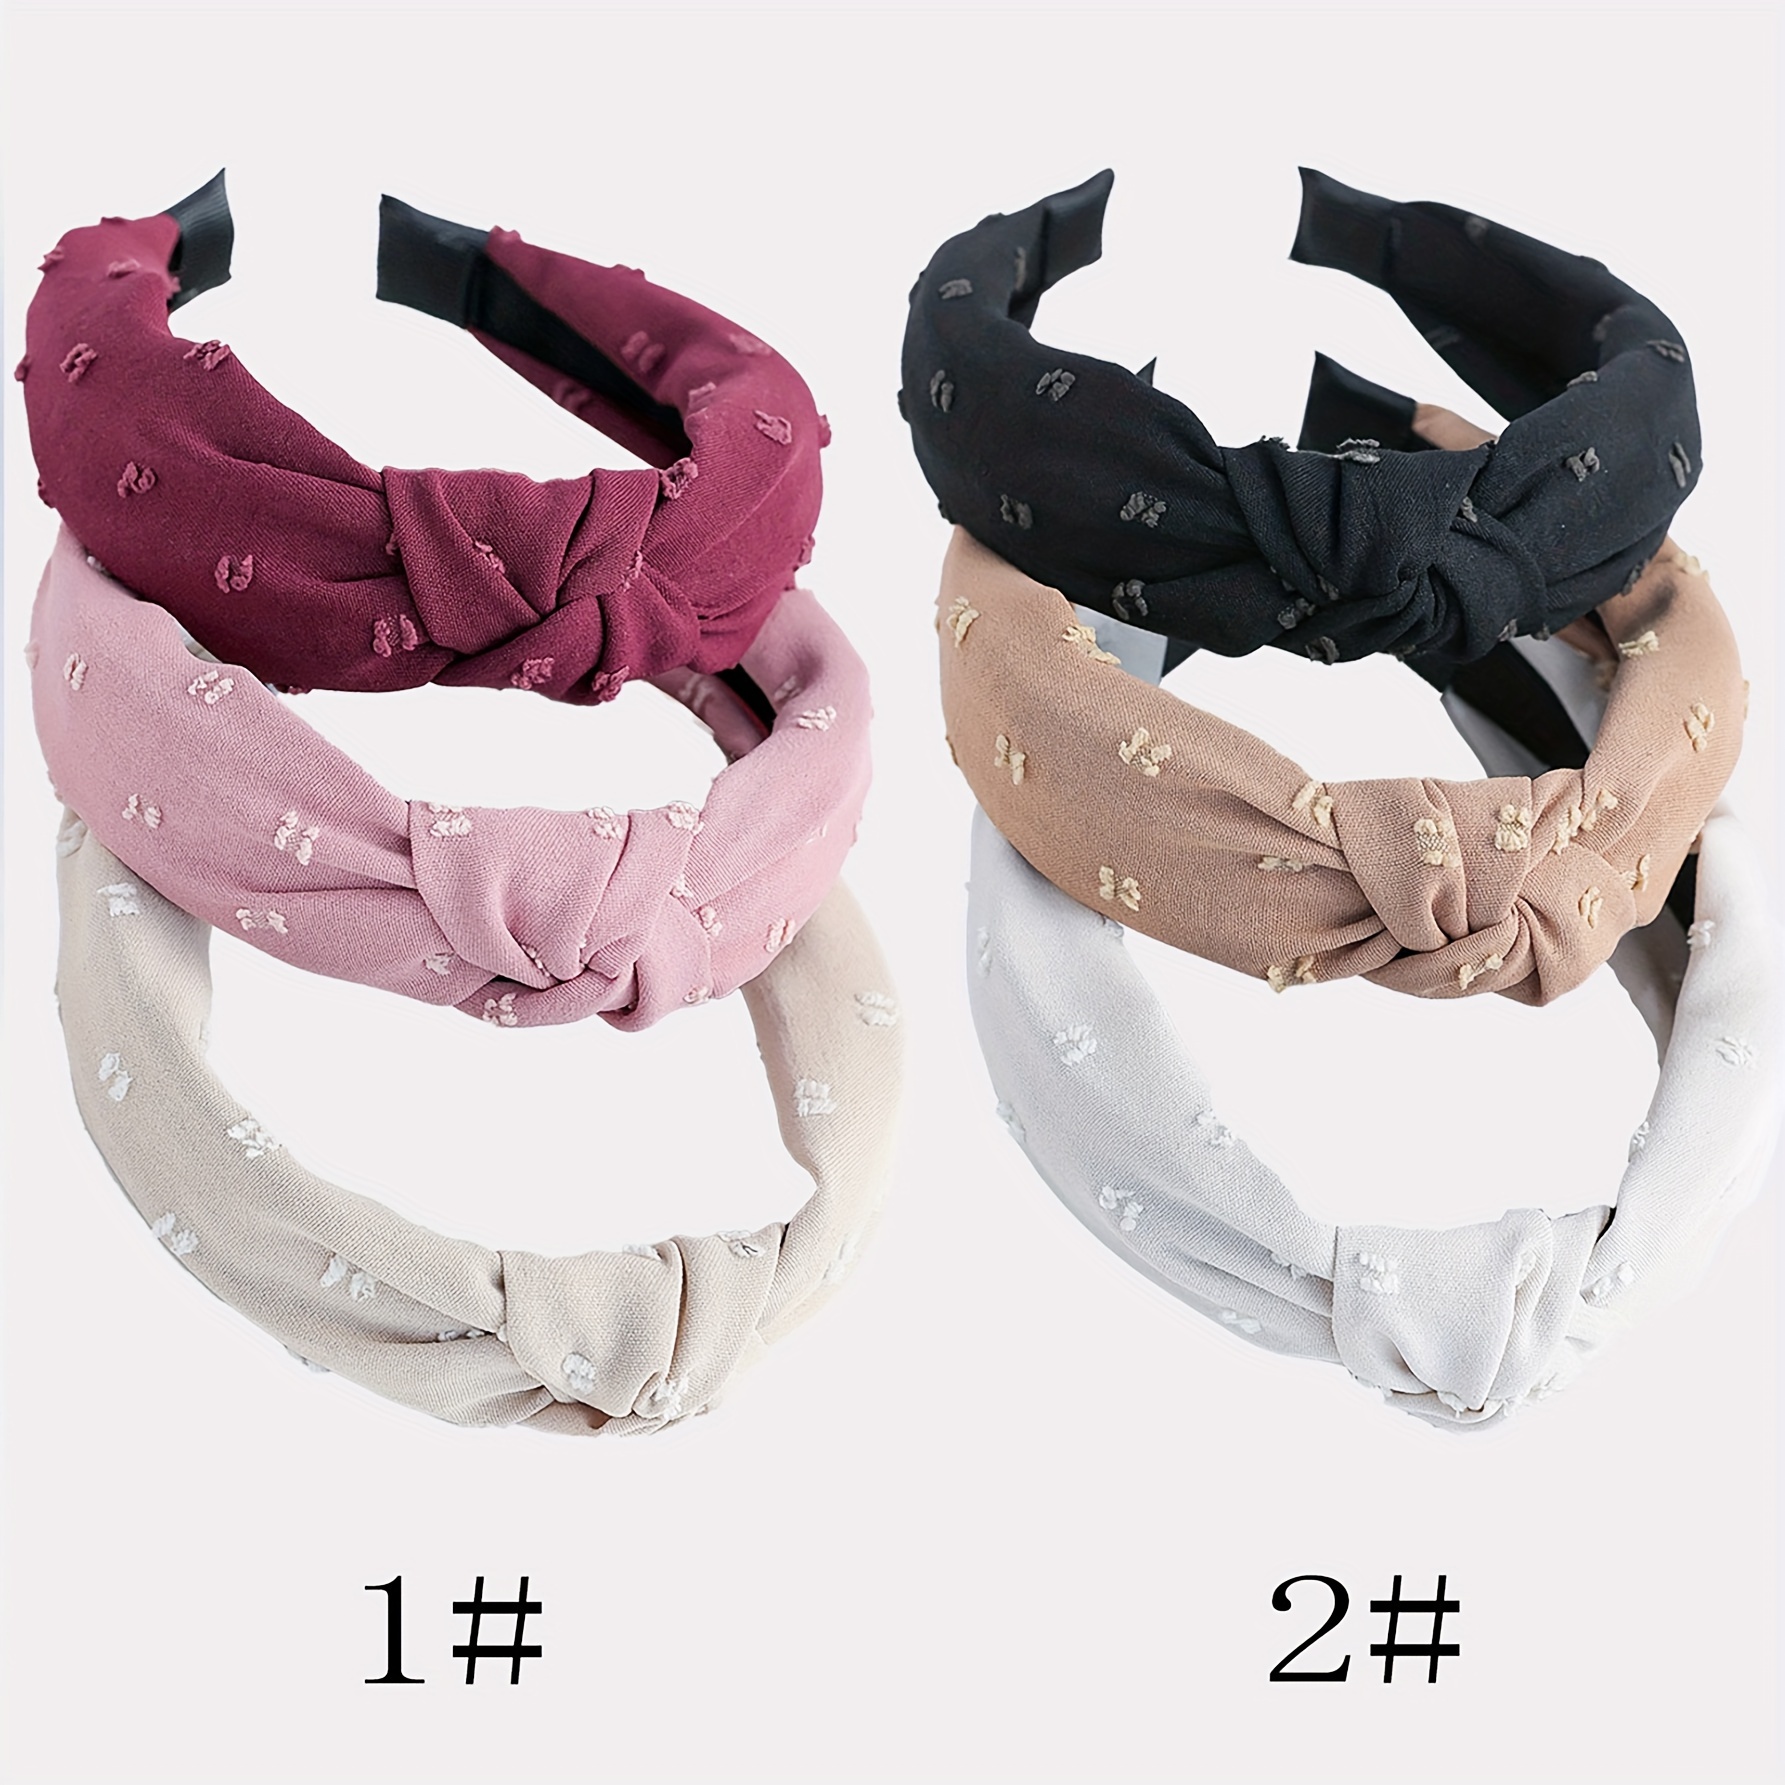 

3 Pcs Simple Solid Color Fabric Headband Cross Top Knot Hair Bands Hair Accessories Twisted Knotted Head Wrap